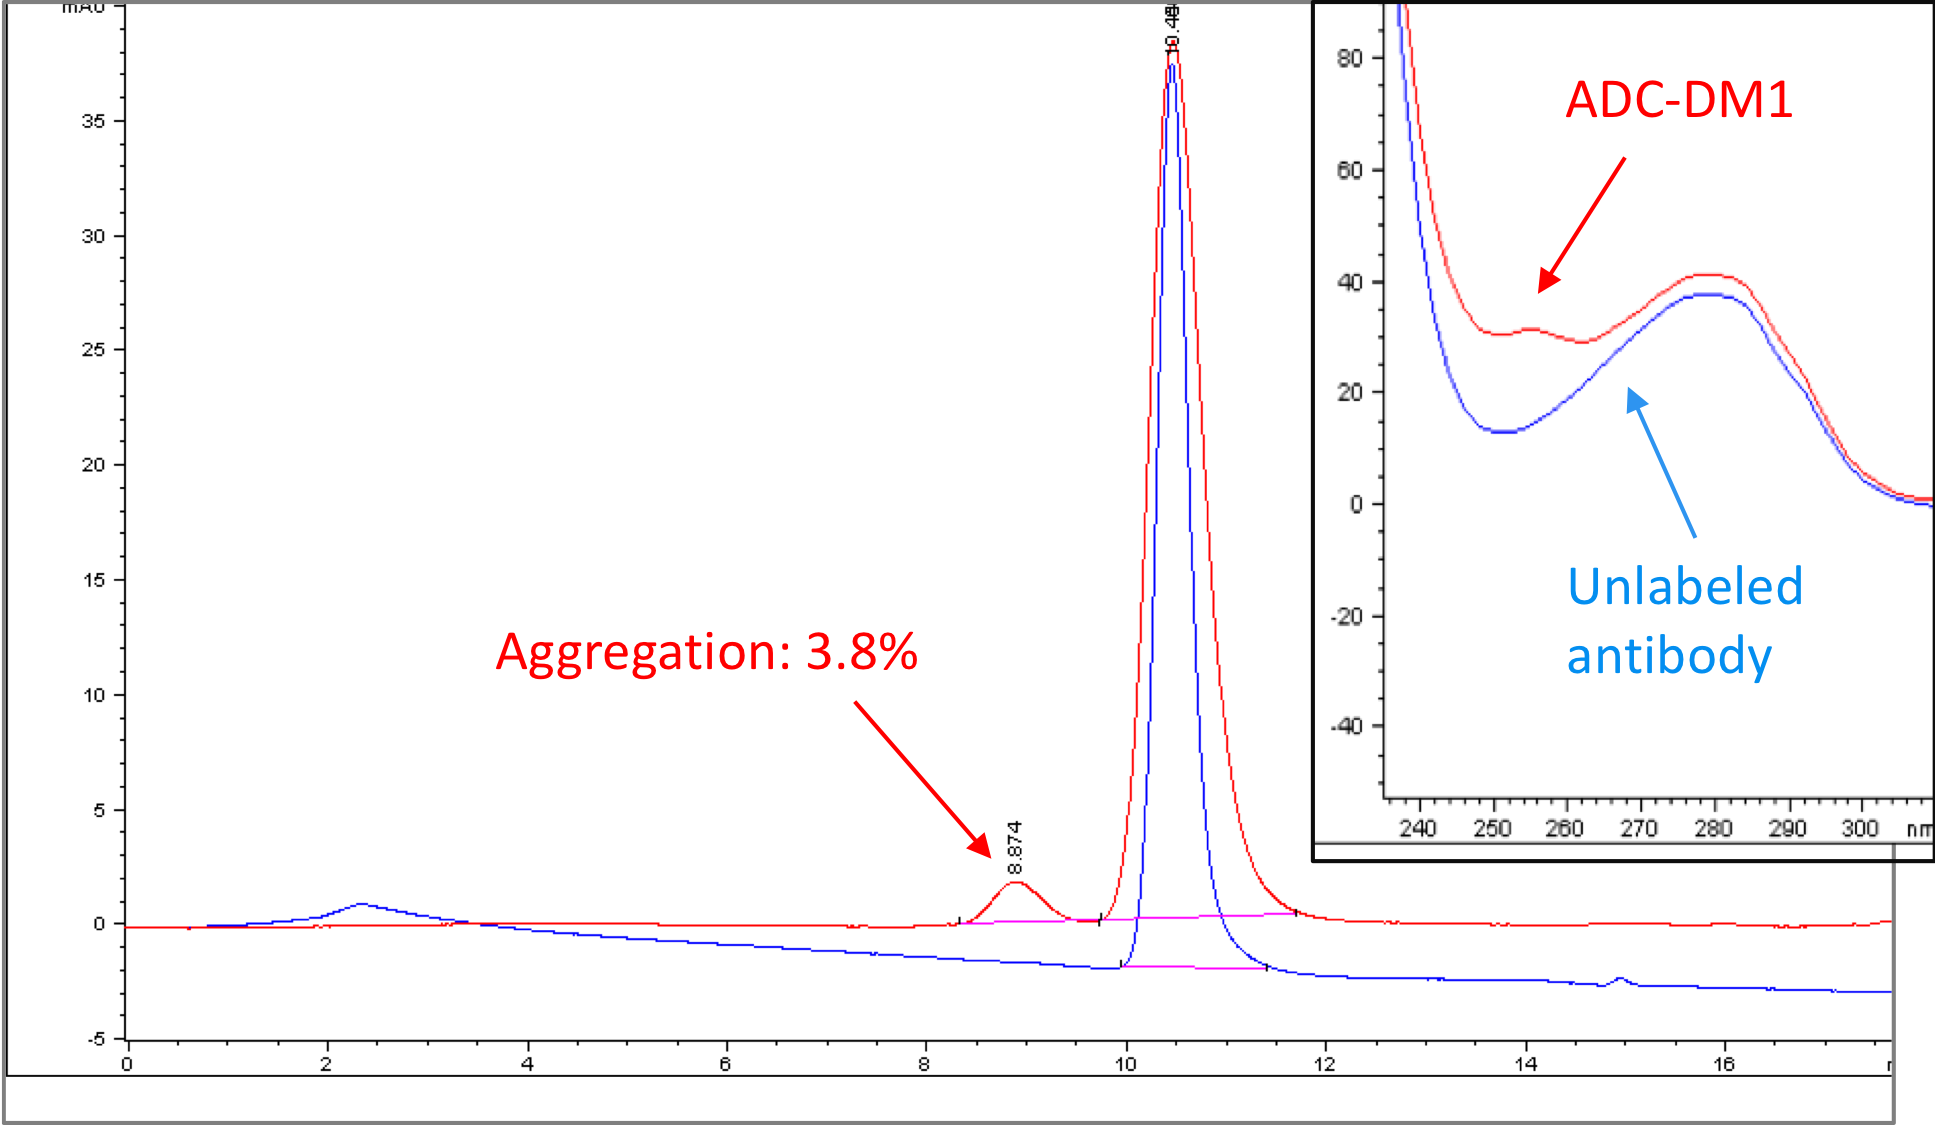 SEC HPLC analysis of unconjugated antibody and purified ADC-DM1 Overlayed with inset of UV/Vis spectra